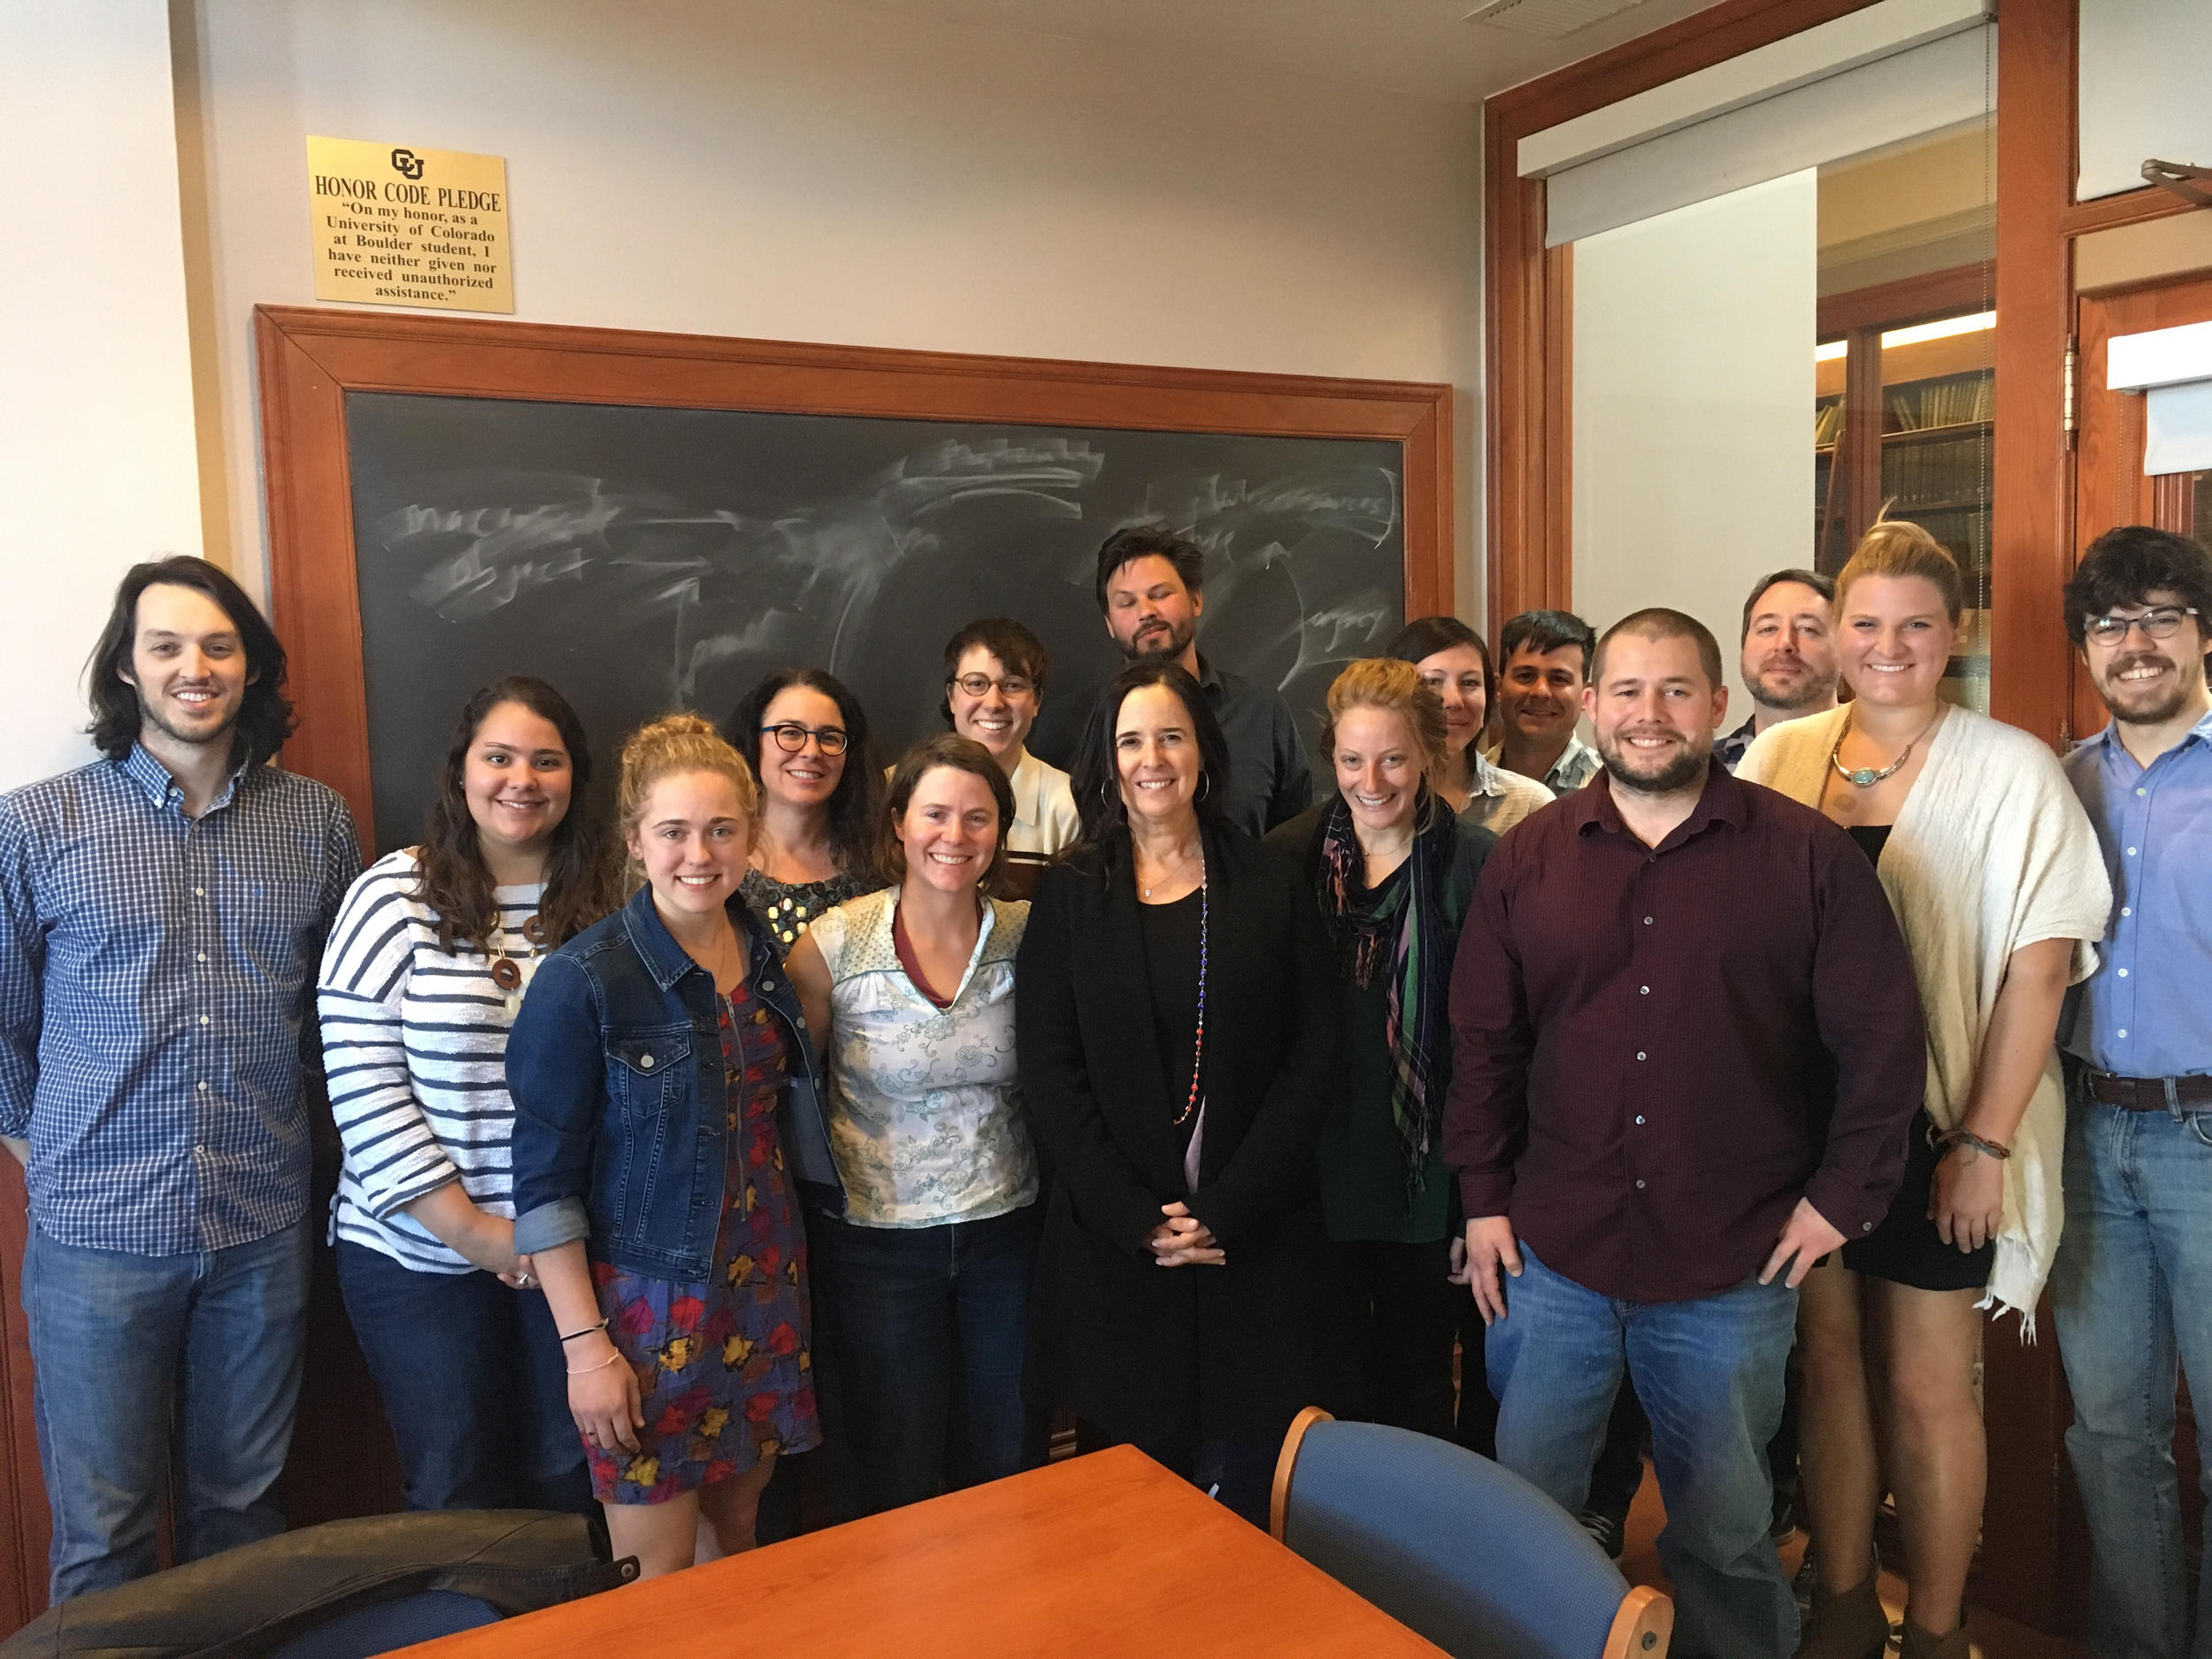 Ruth Behar with Graduate Students in Carole McGranahan's Seminar in Anthropology, April 6, 2016